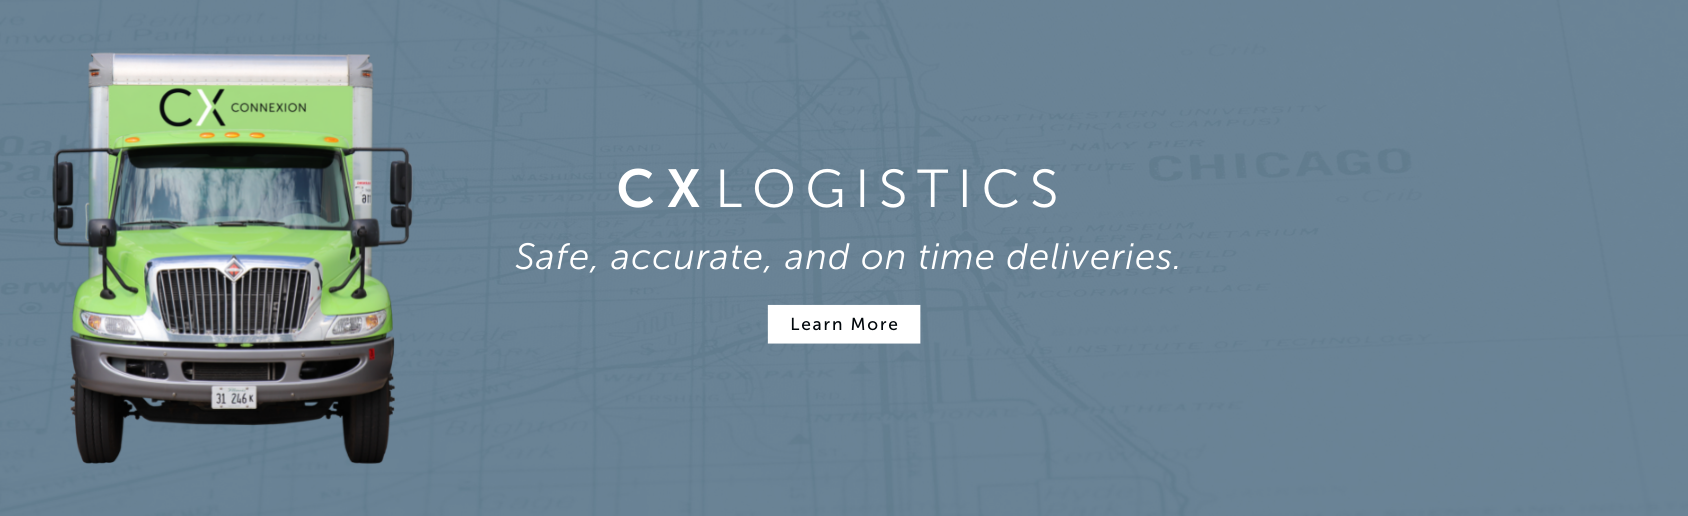 CX-Logistics-Home-Page-Banner2.png